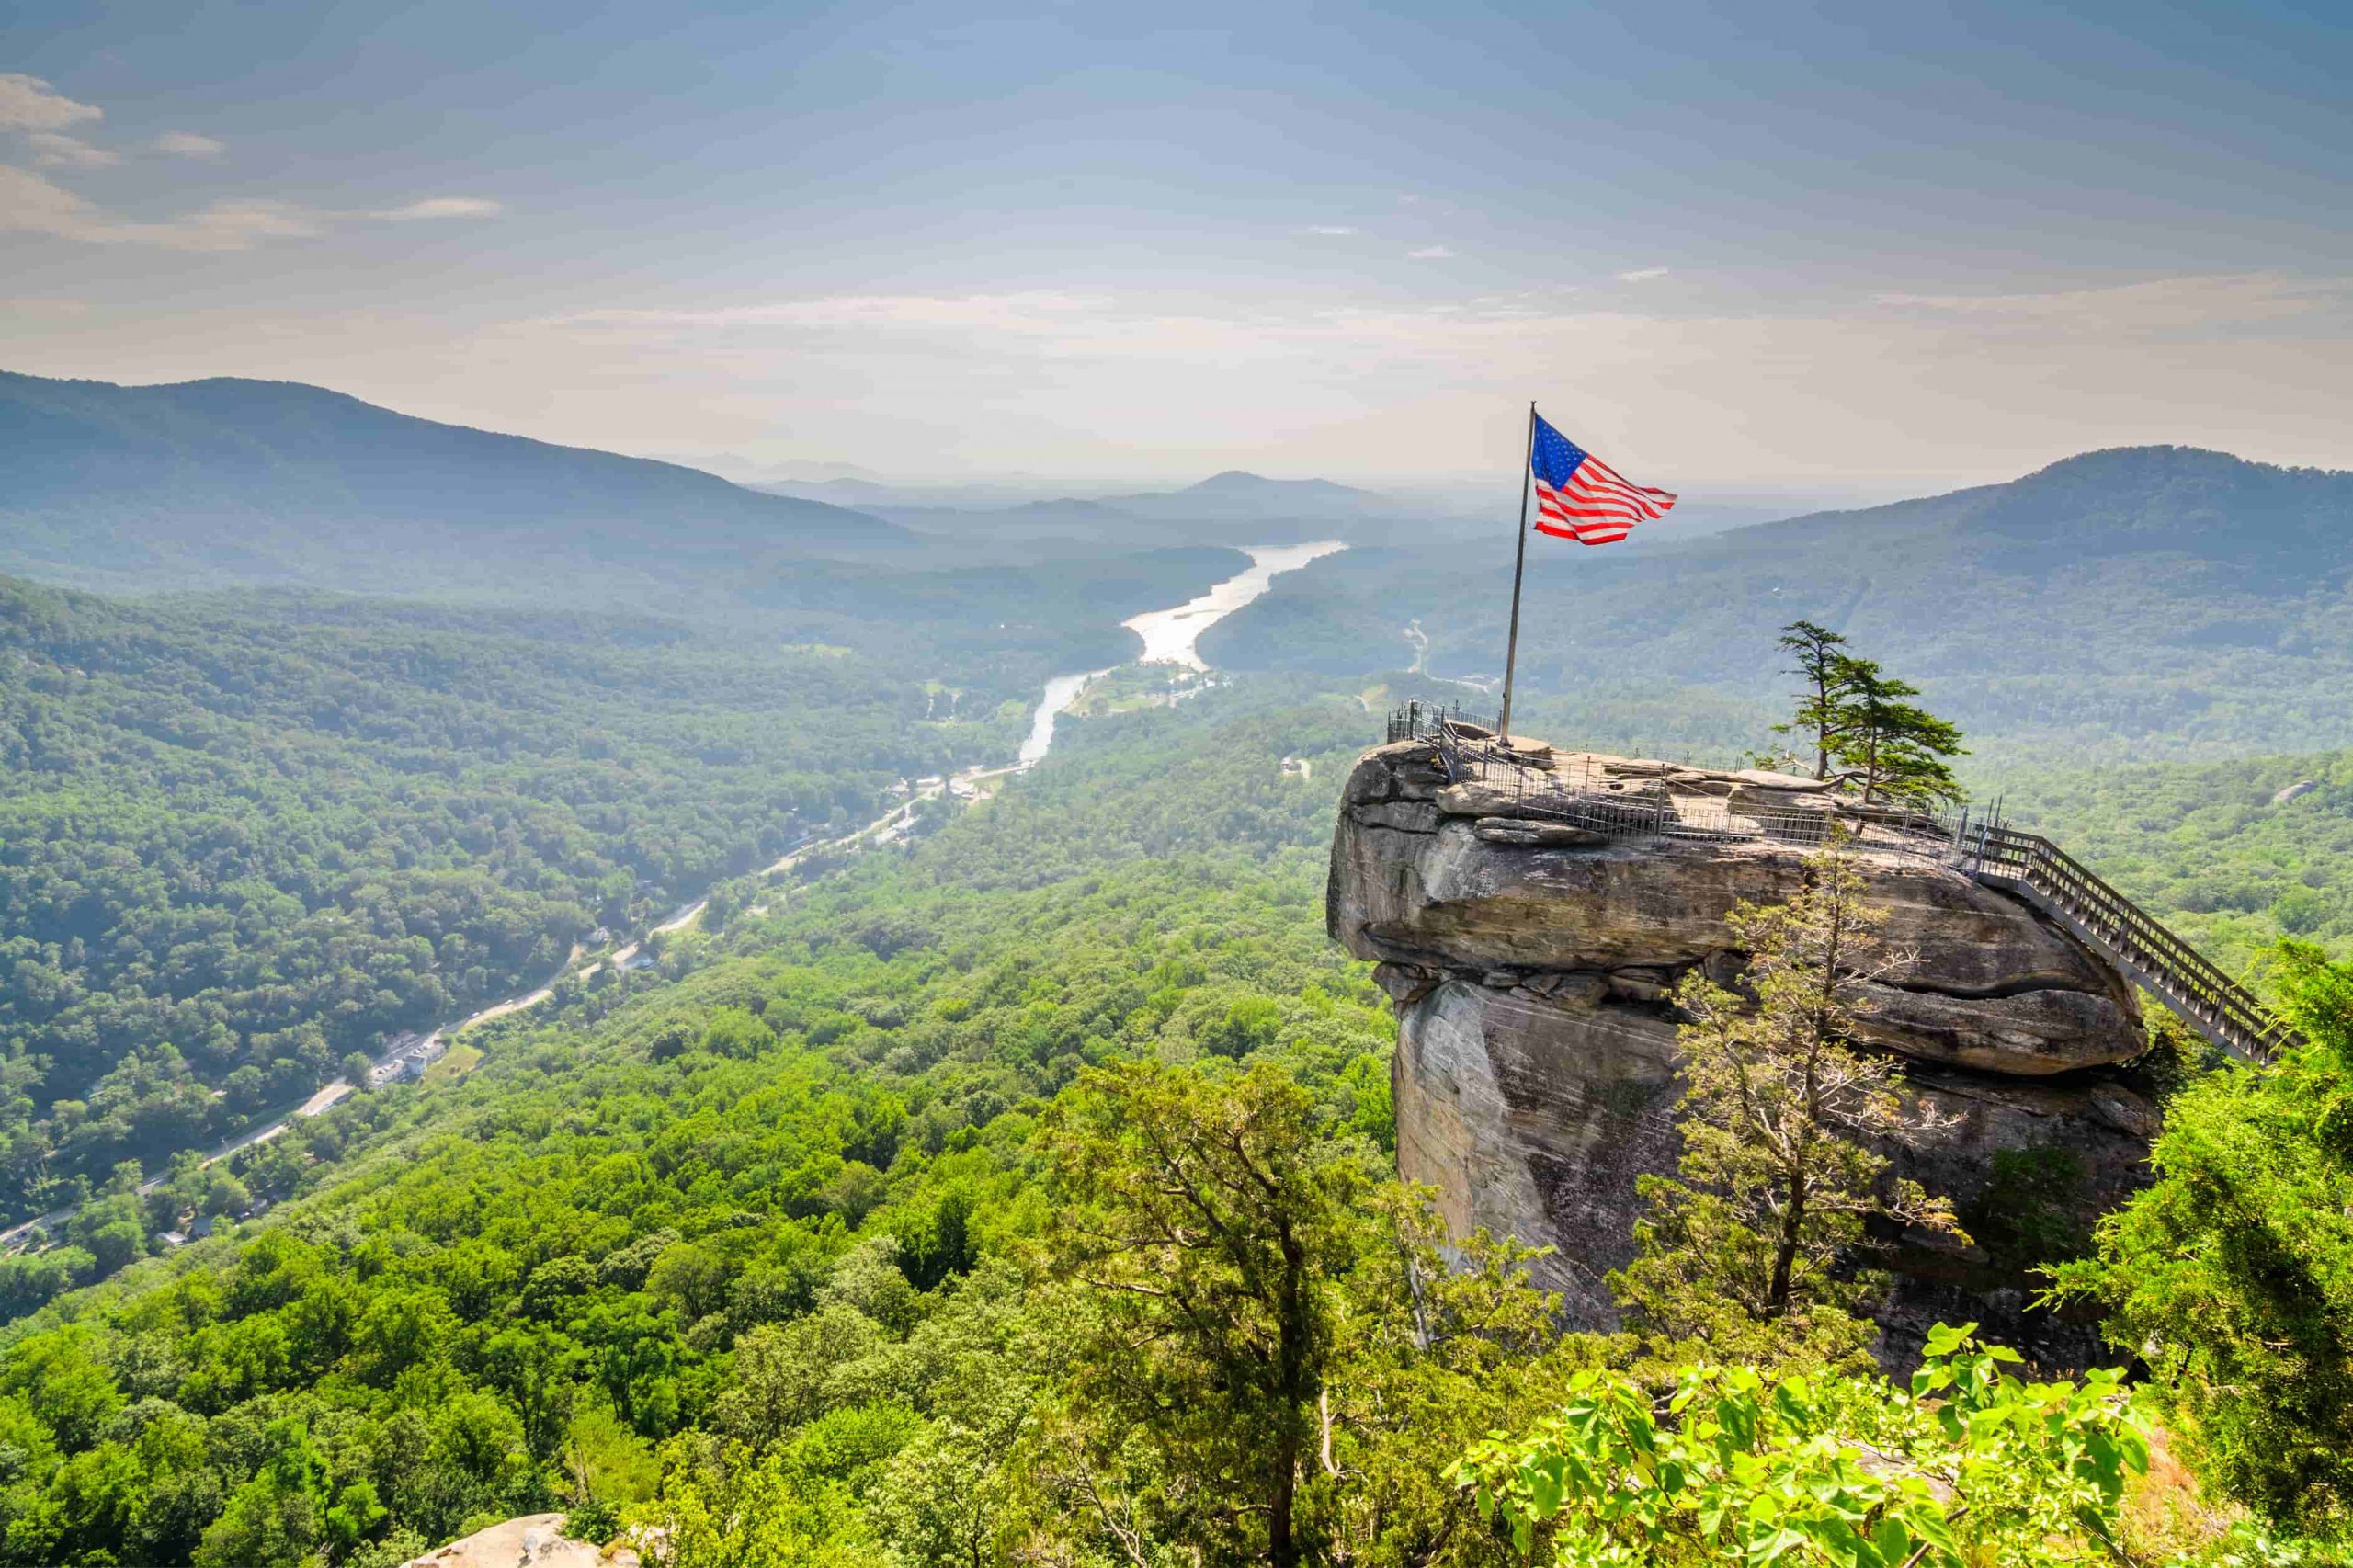 Campers Share Their 9 Favorite Campgrounds in North Carolina